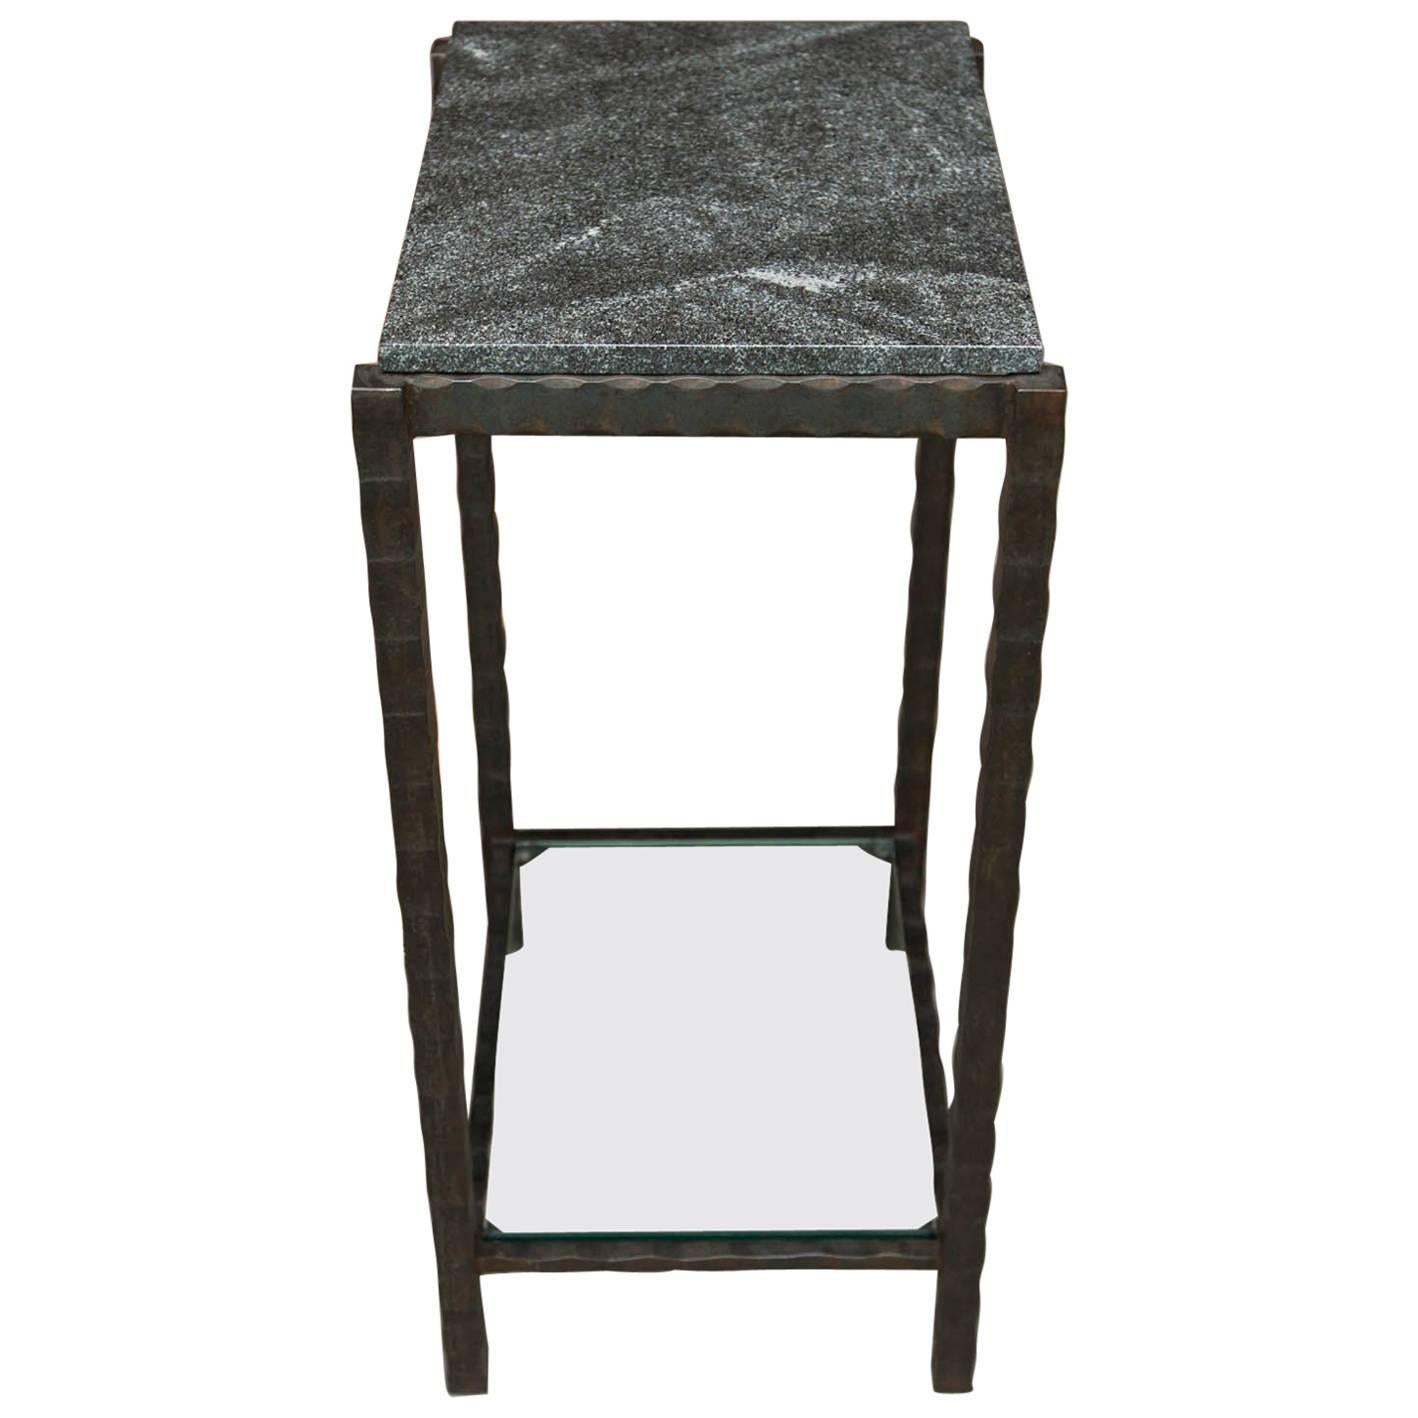 Hand-Forged Steel and Granite Side Table by Gregory Clark